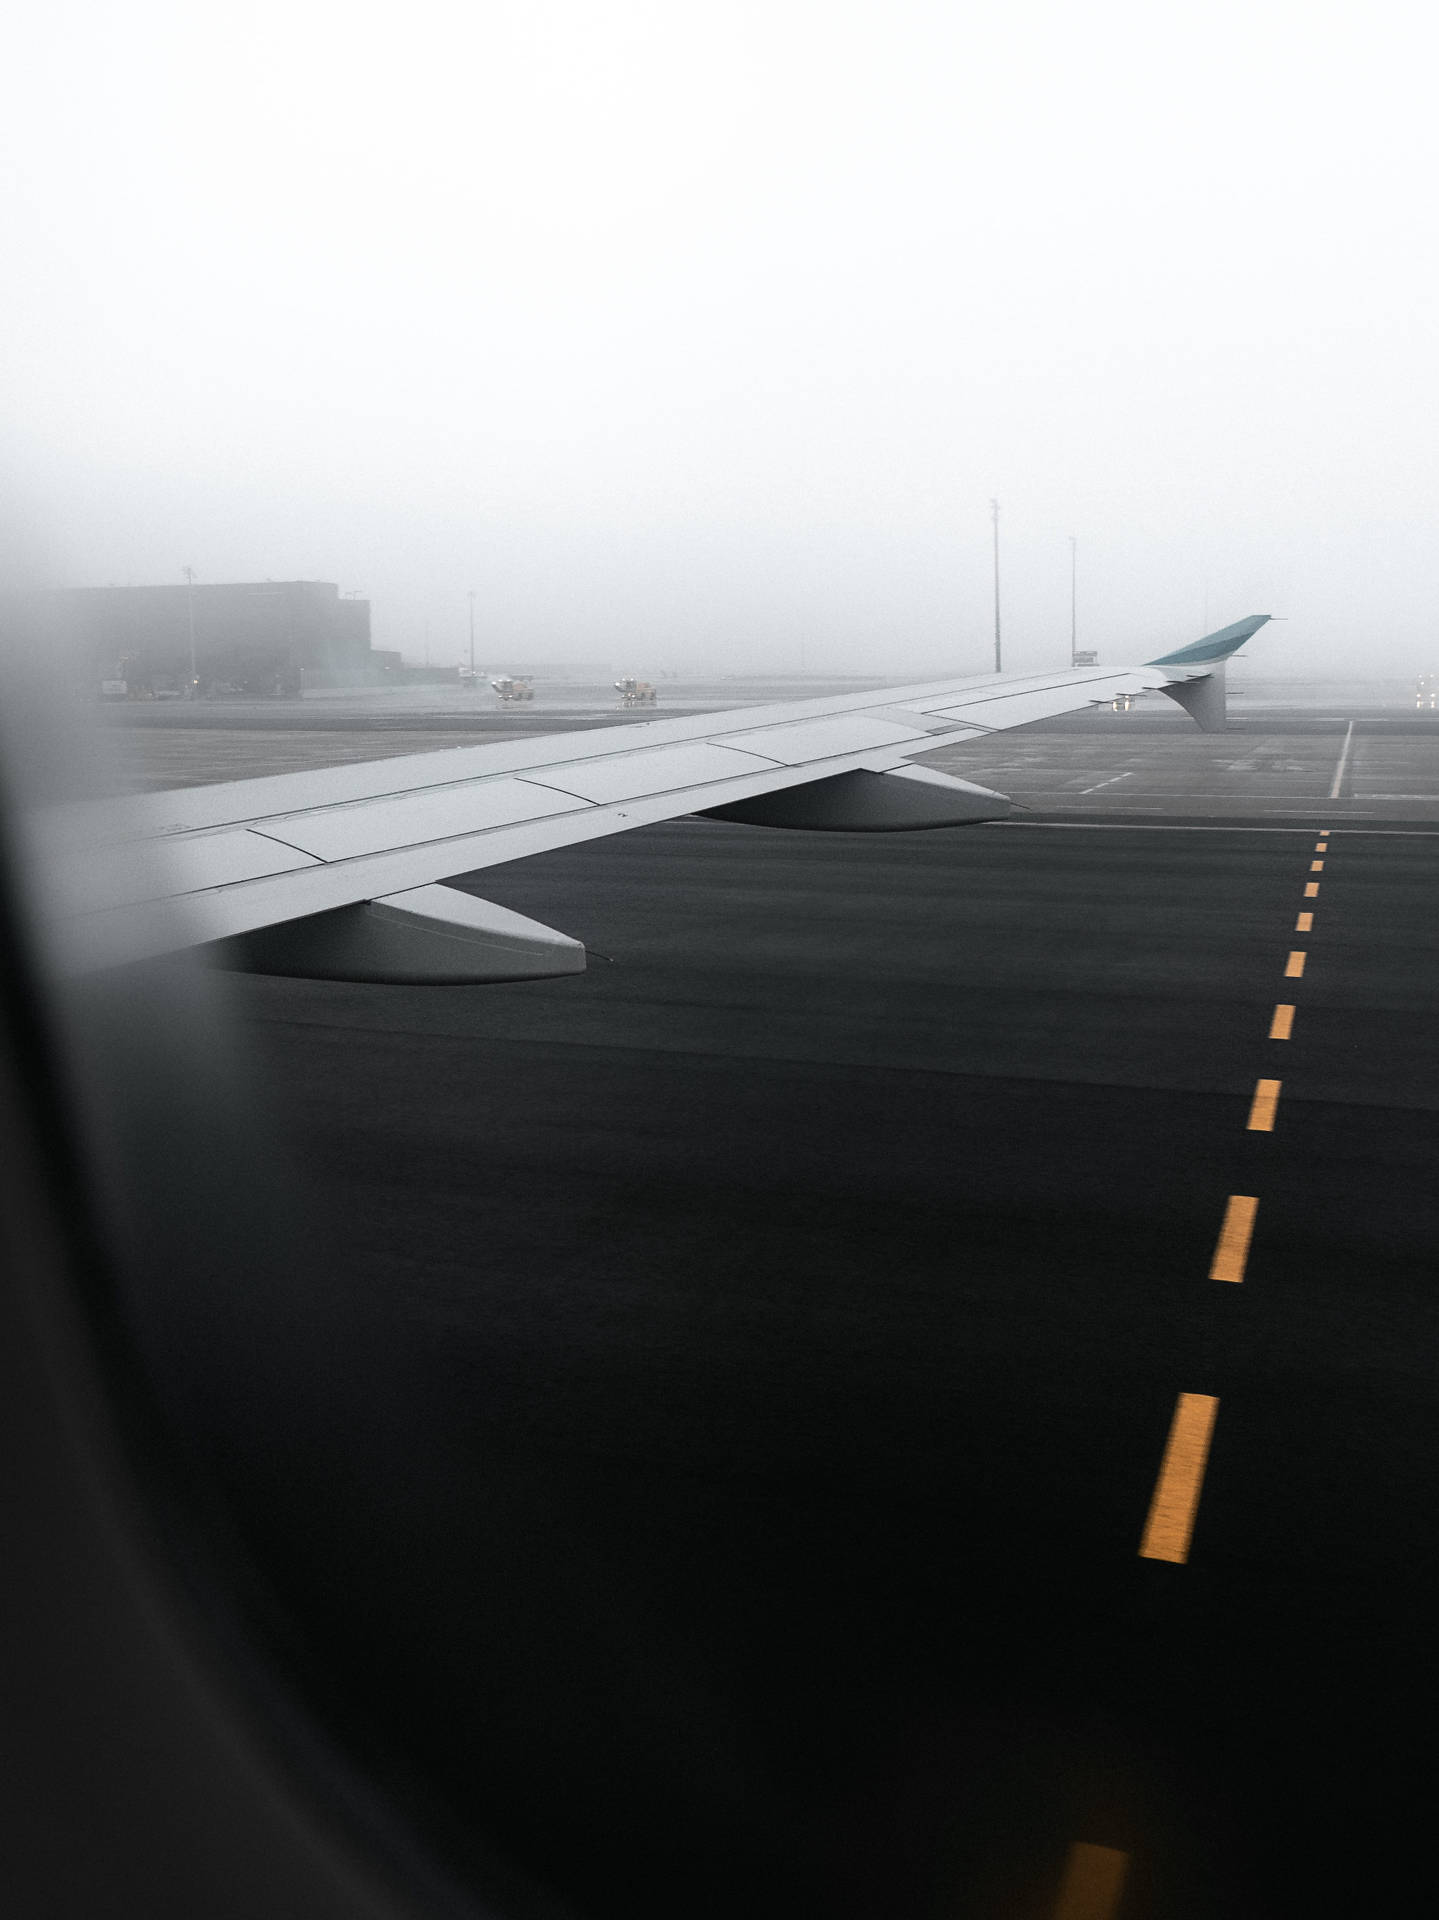 Plane Wing On The Runway Wallpaper